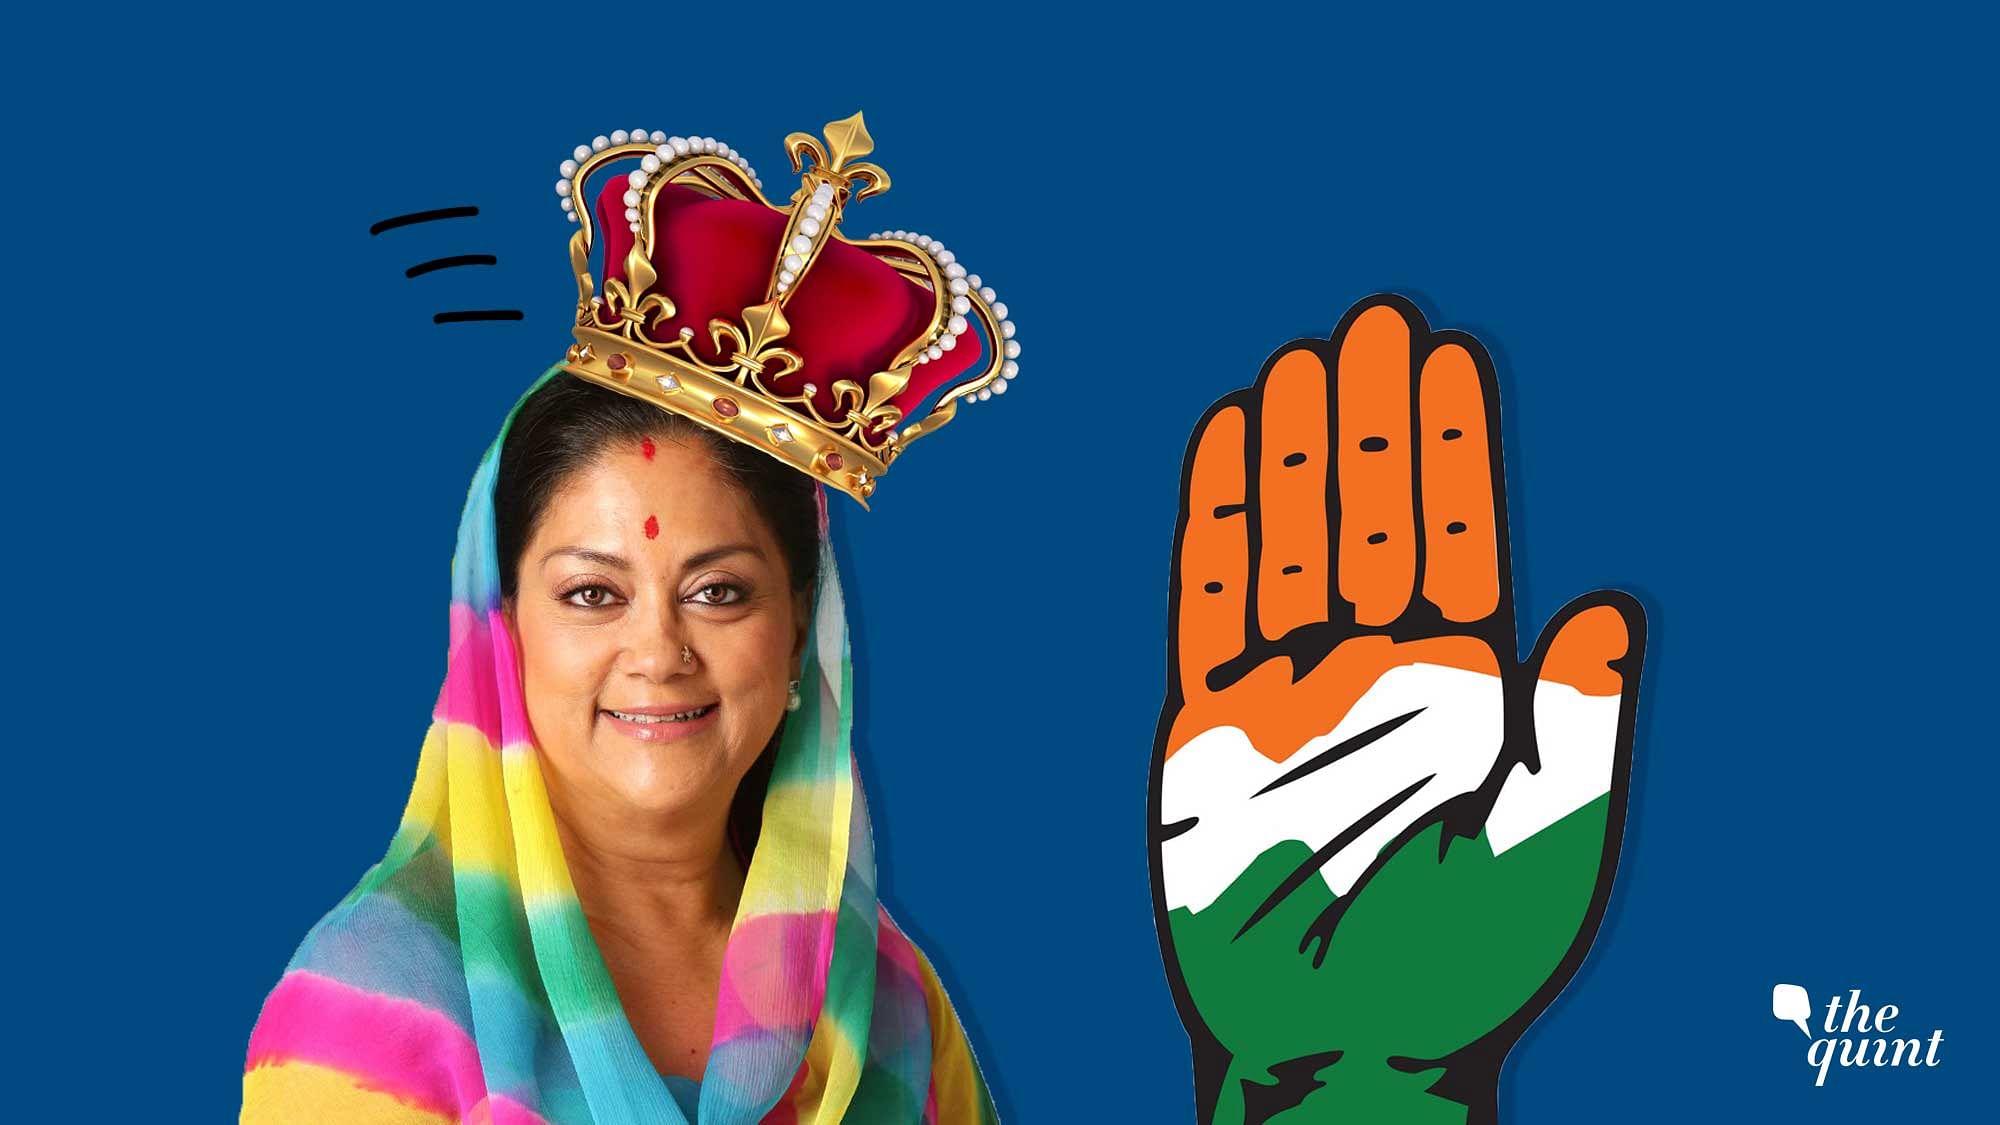 Image of current Rajasthan CM Vasundhara Raje and the Congress party symbol used for representational purposes.